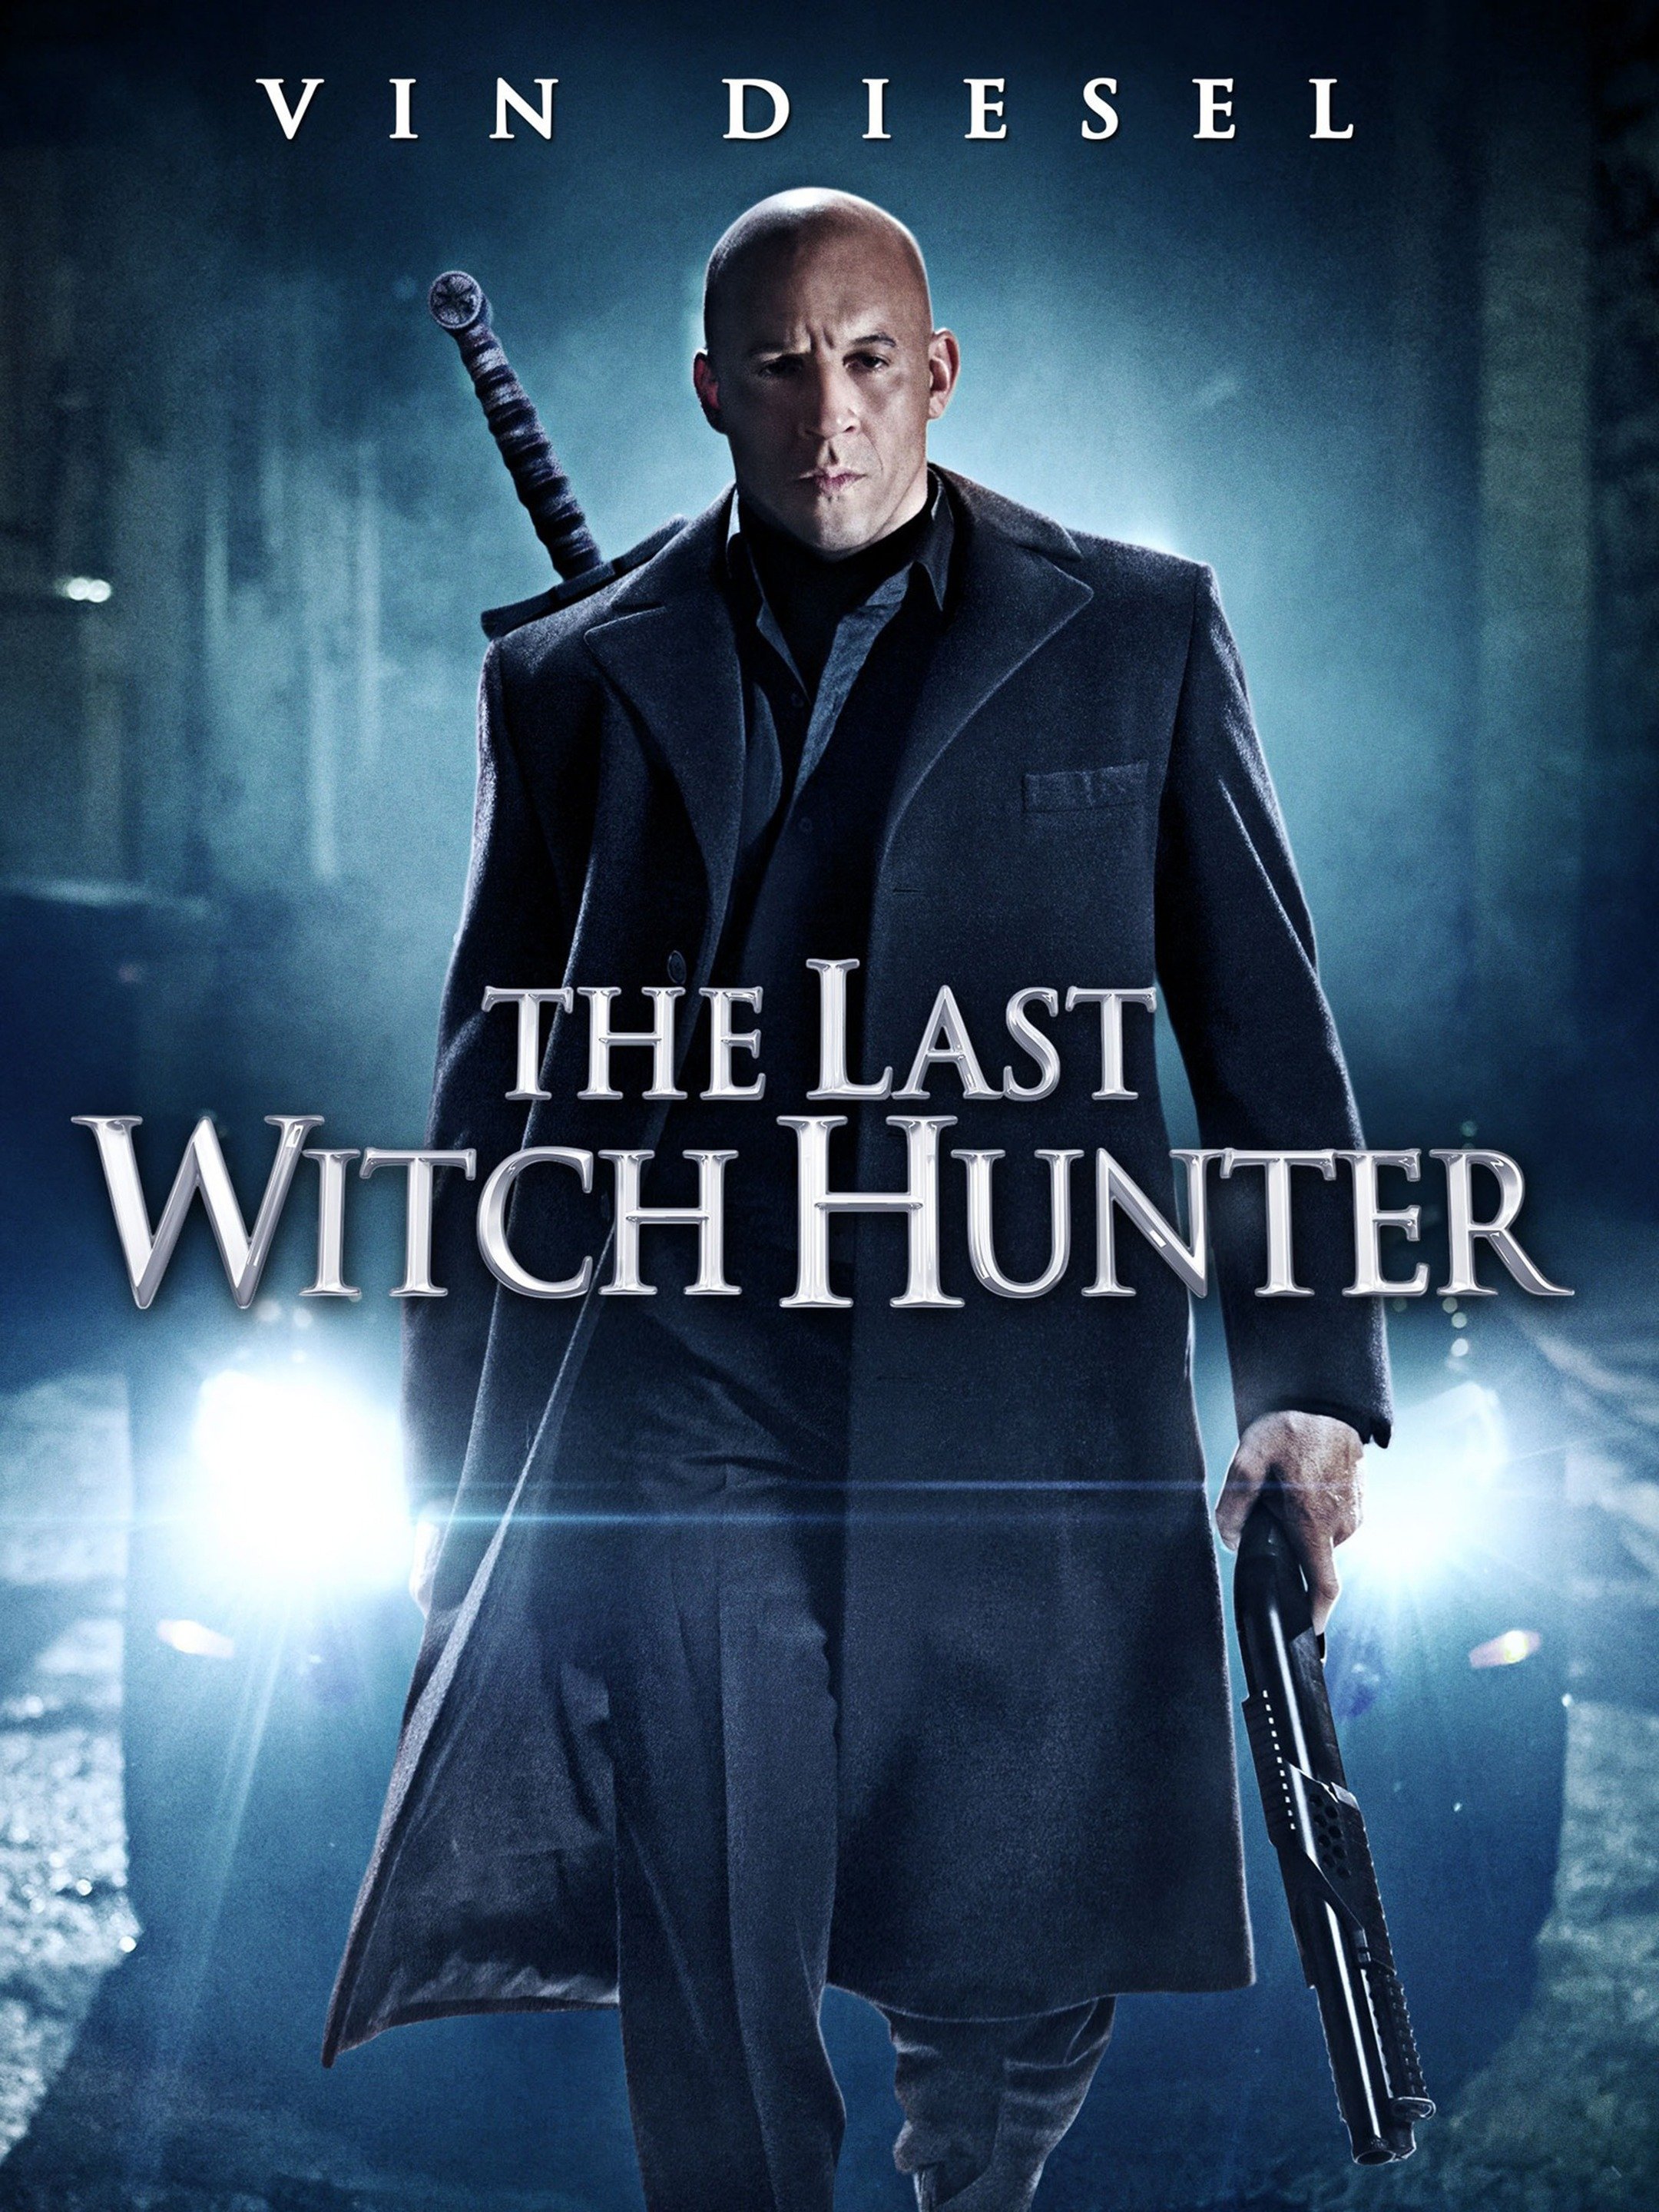 synopsis-for-movie-the-last-witch-hunter-hopdeandmore